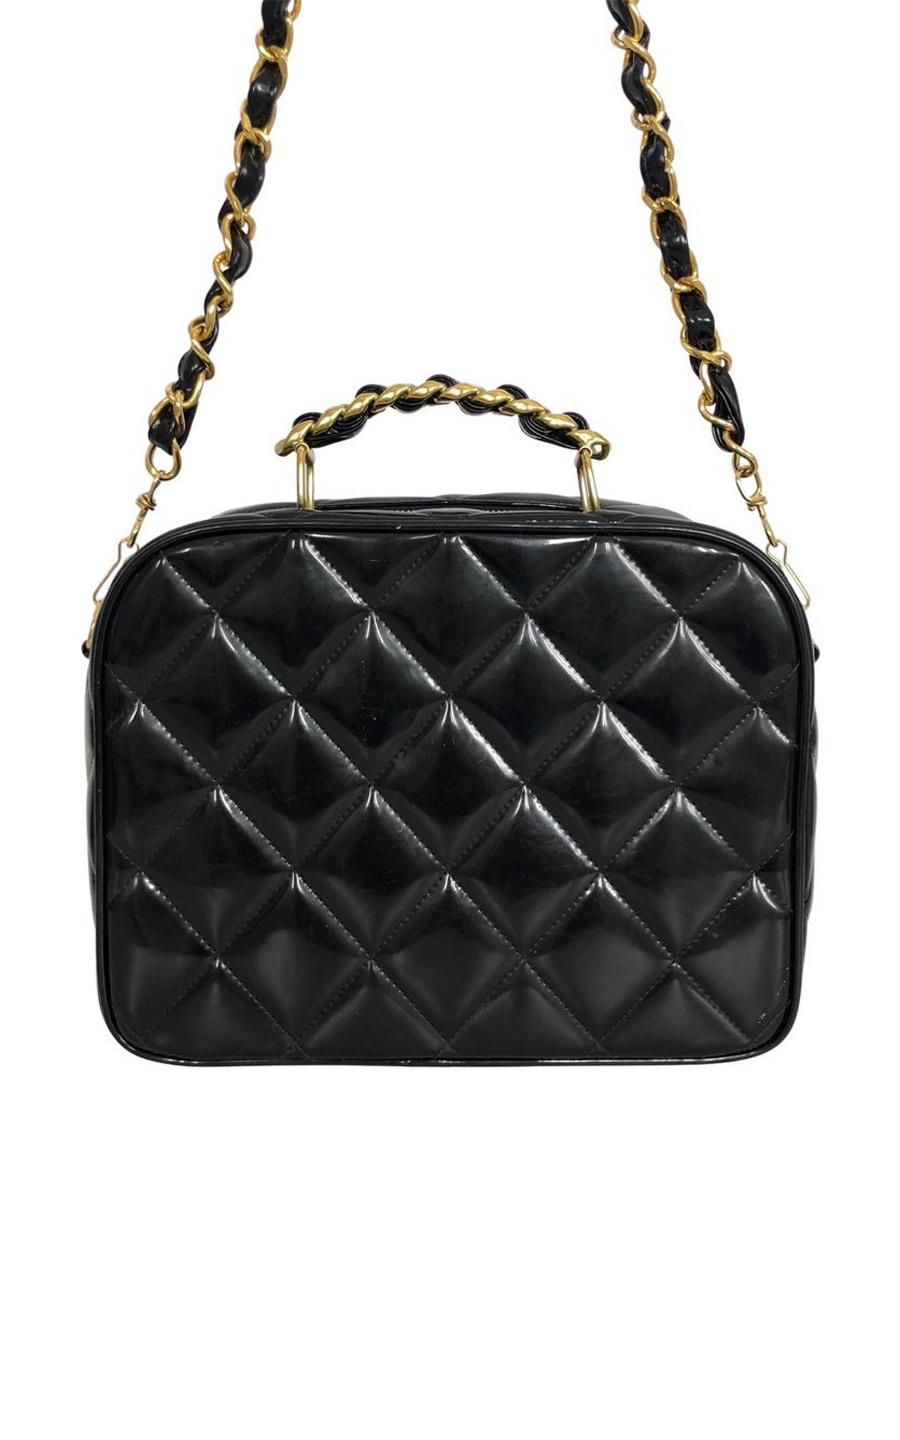 Chanel Limited Edition Crossbody bag in black Enamel (patent) leather. The bag has gold colored hardware. The bag opens with a zipper. The black inside features one main compartment. There is one zipper pocket and one slip-in pocket inside. The bag